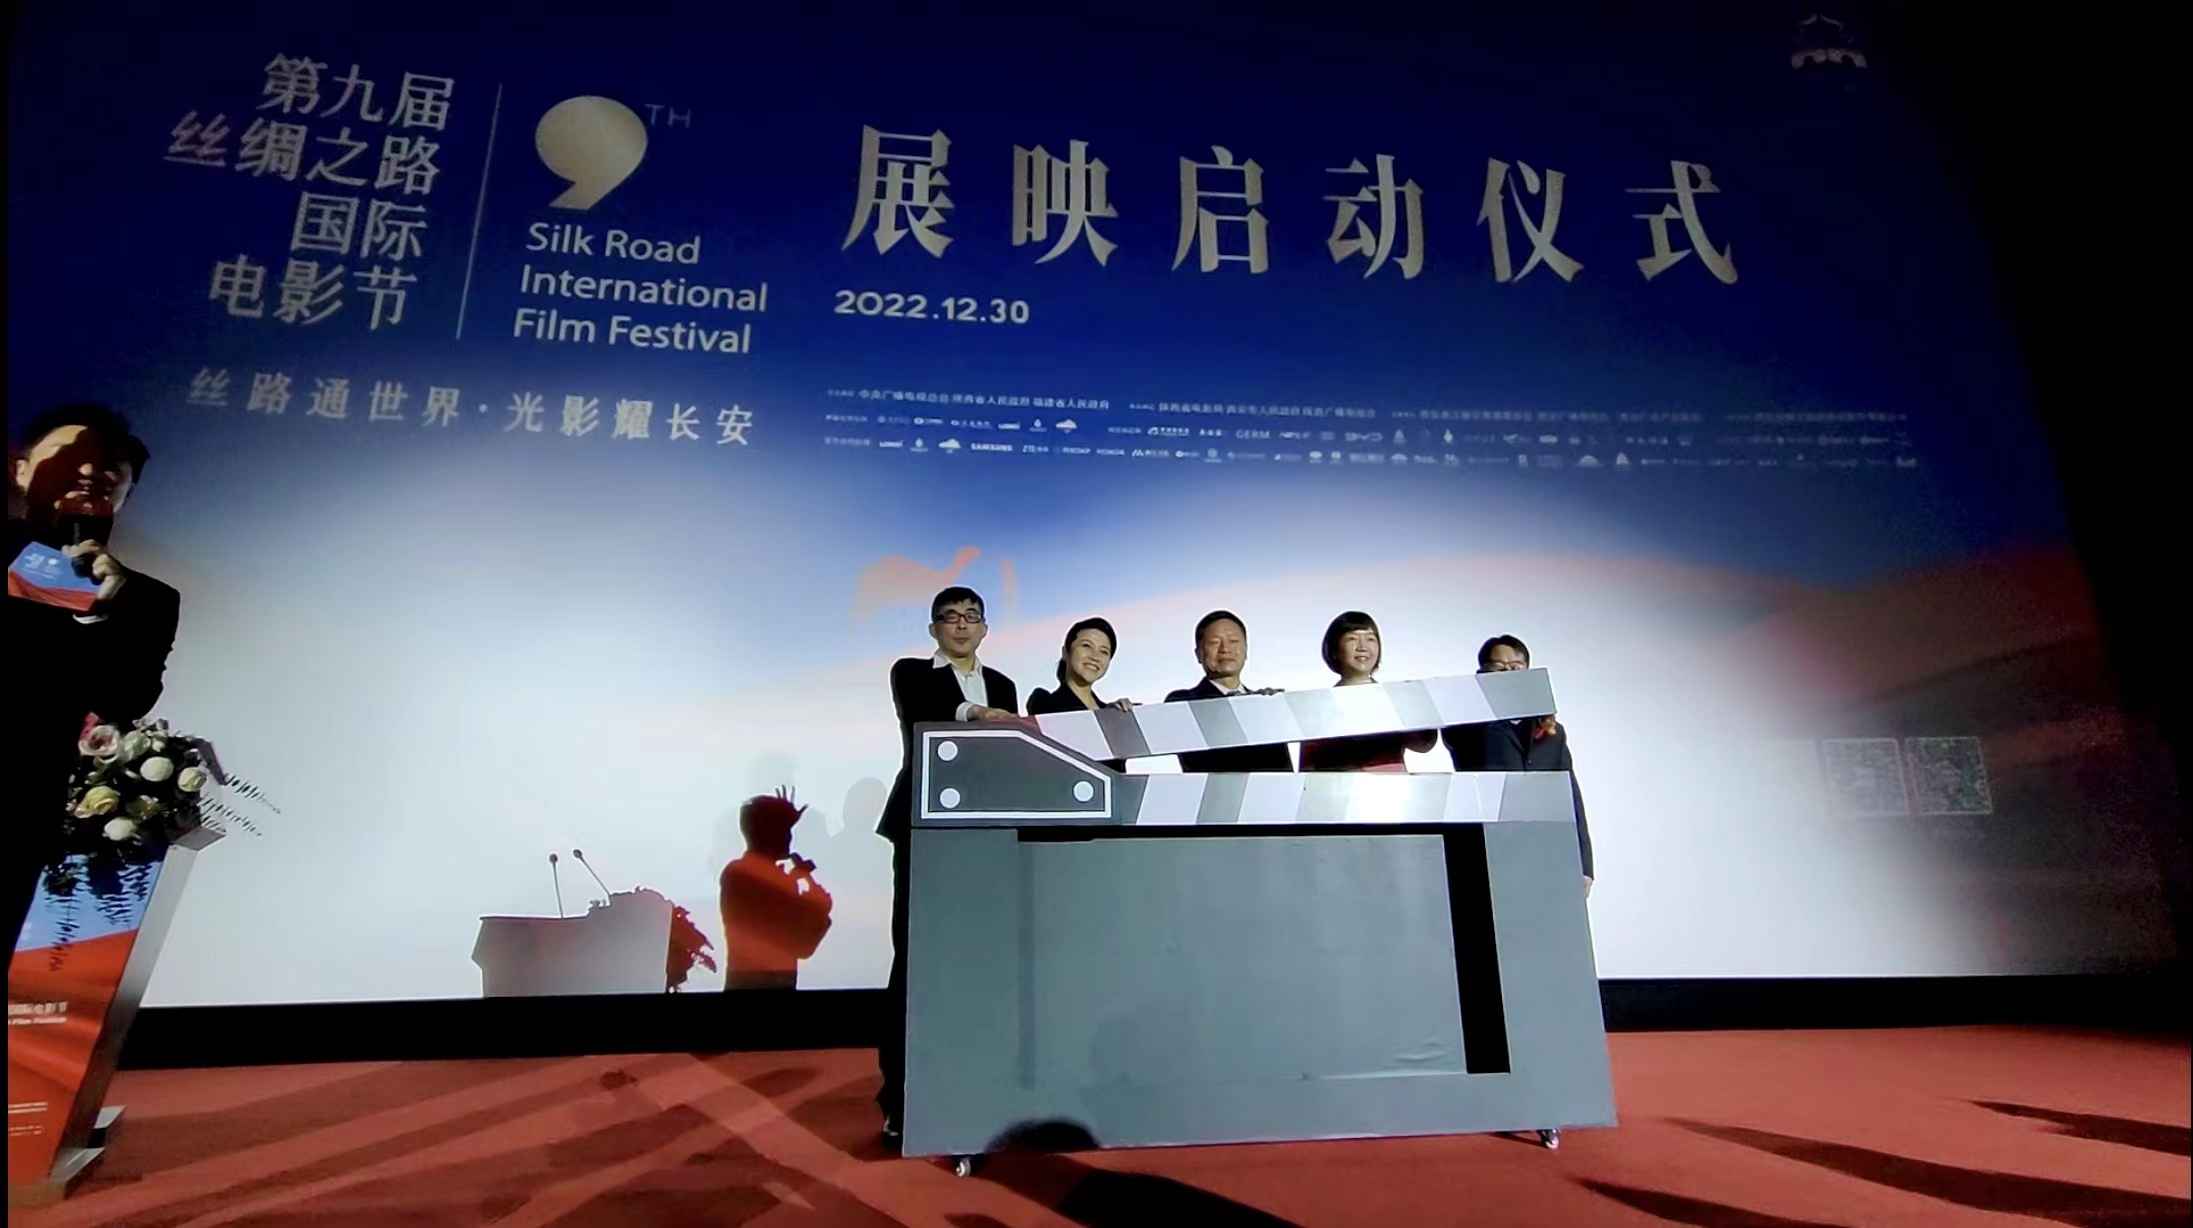 The launching ceremony of the screening section of the 9th Silk Road International Film Festival, Xi'an, Shaanxi Province, China, December 30, 2022. /CMG